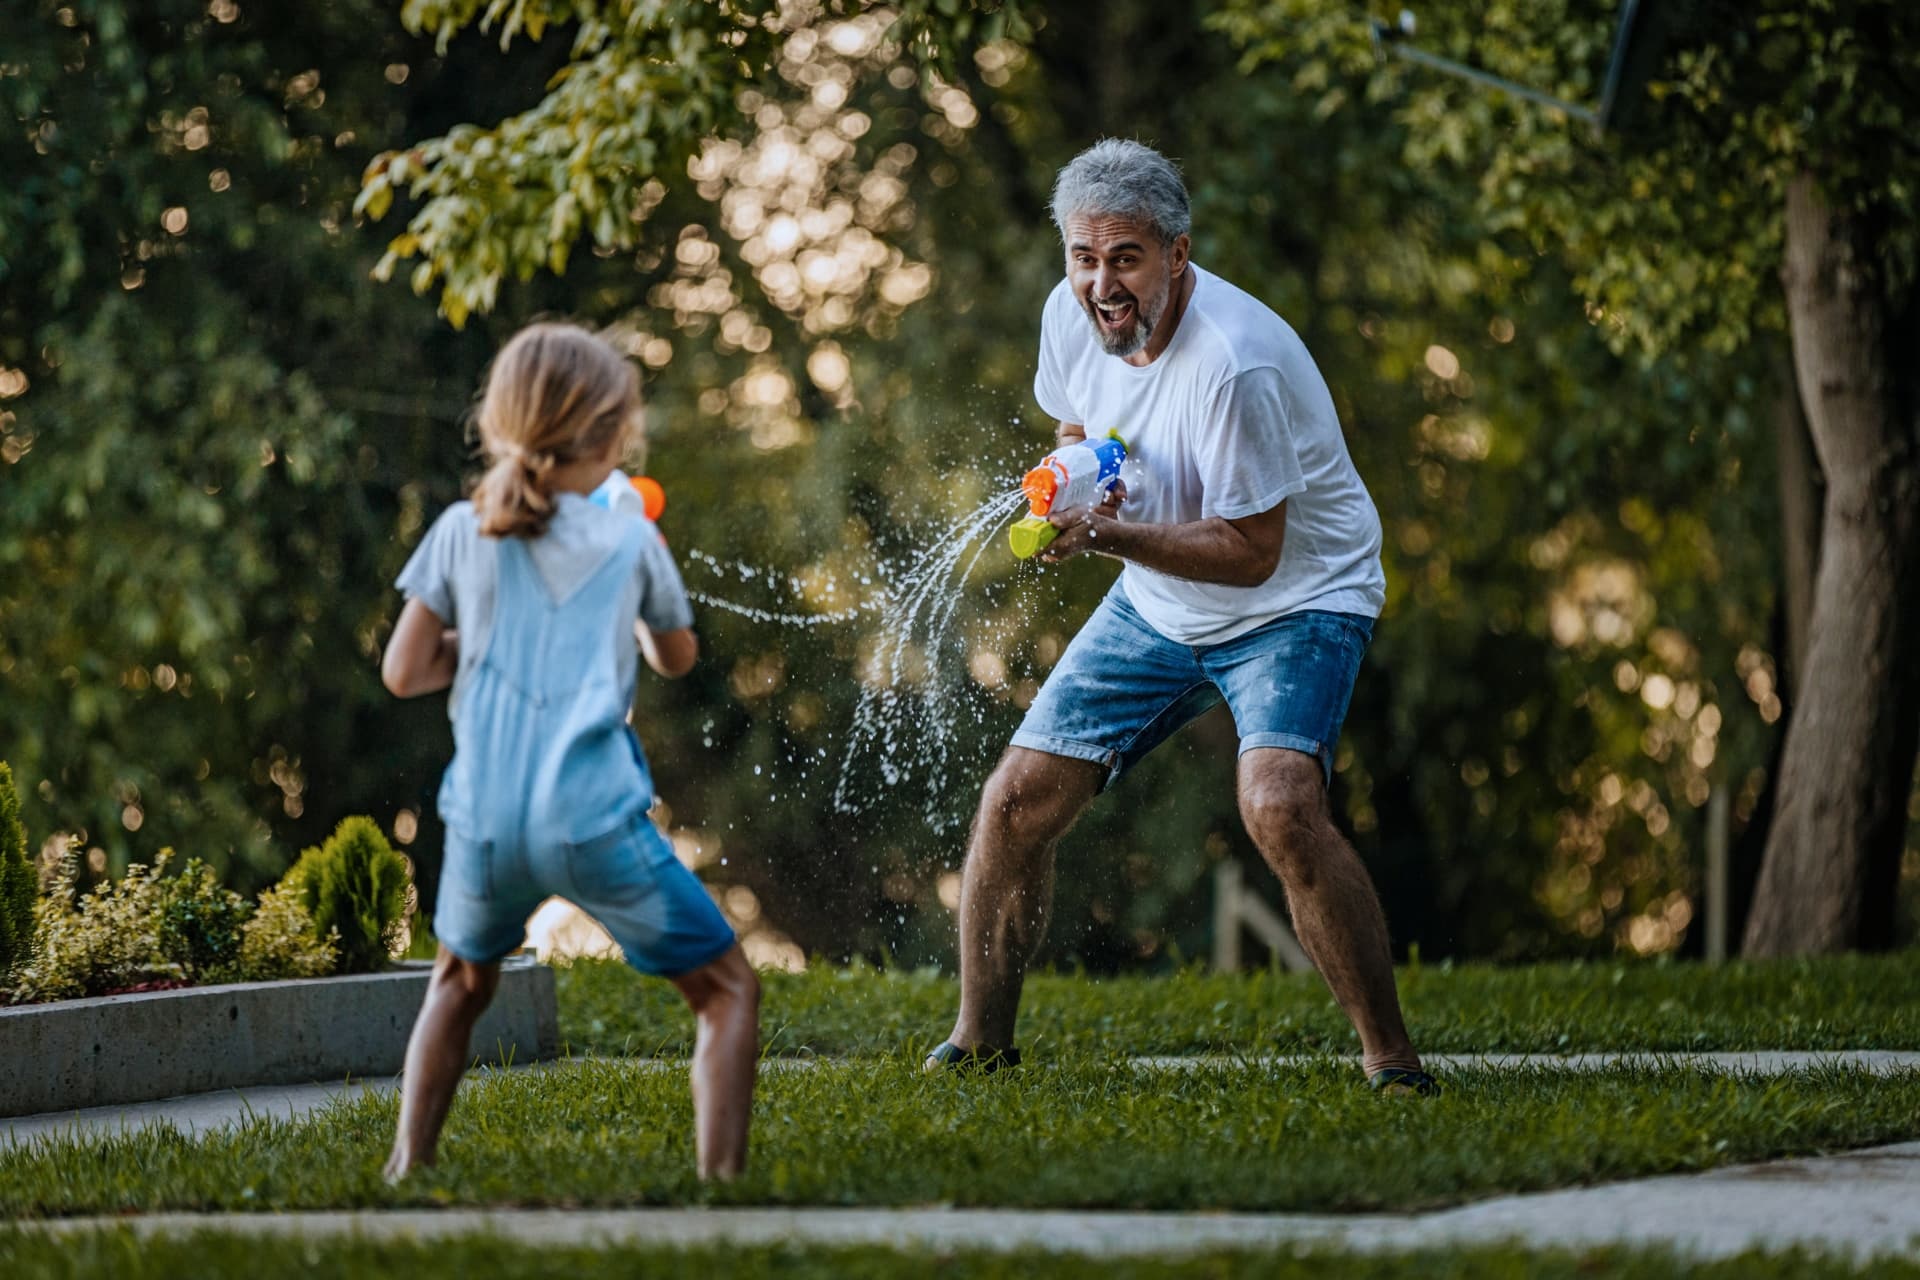 Friendly water gun fight in a garden between grandfather and his granddaughter.